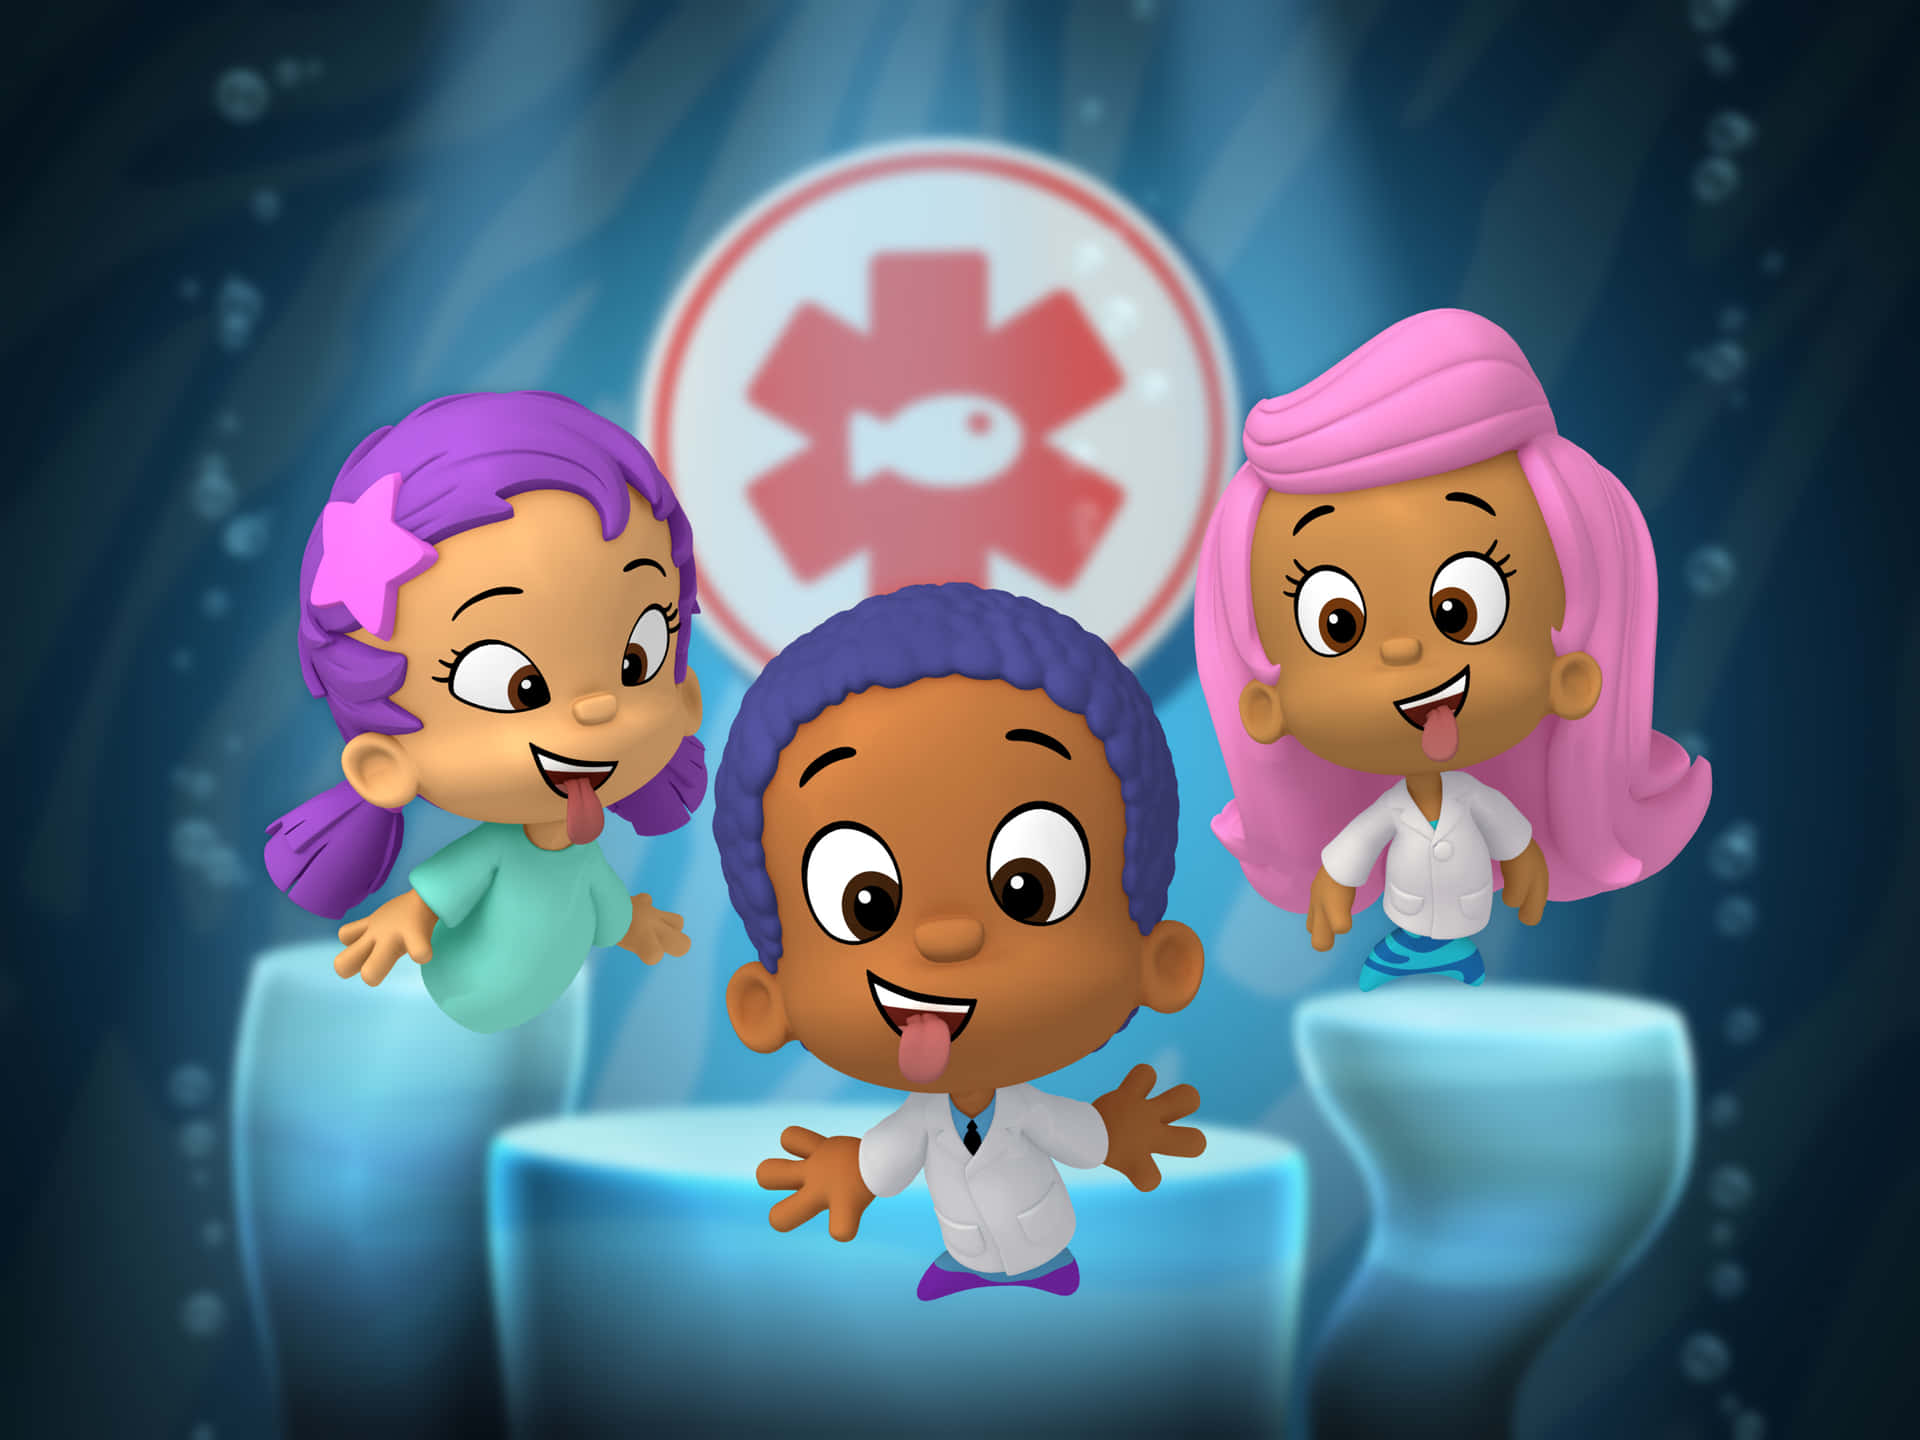 Join the Bubble Guppies on their underwater adventures!